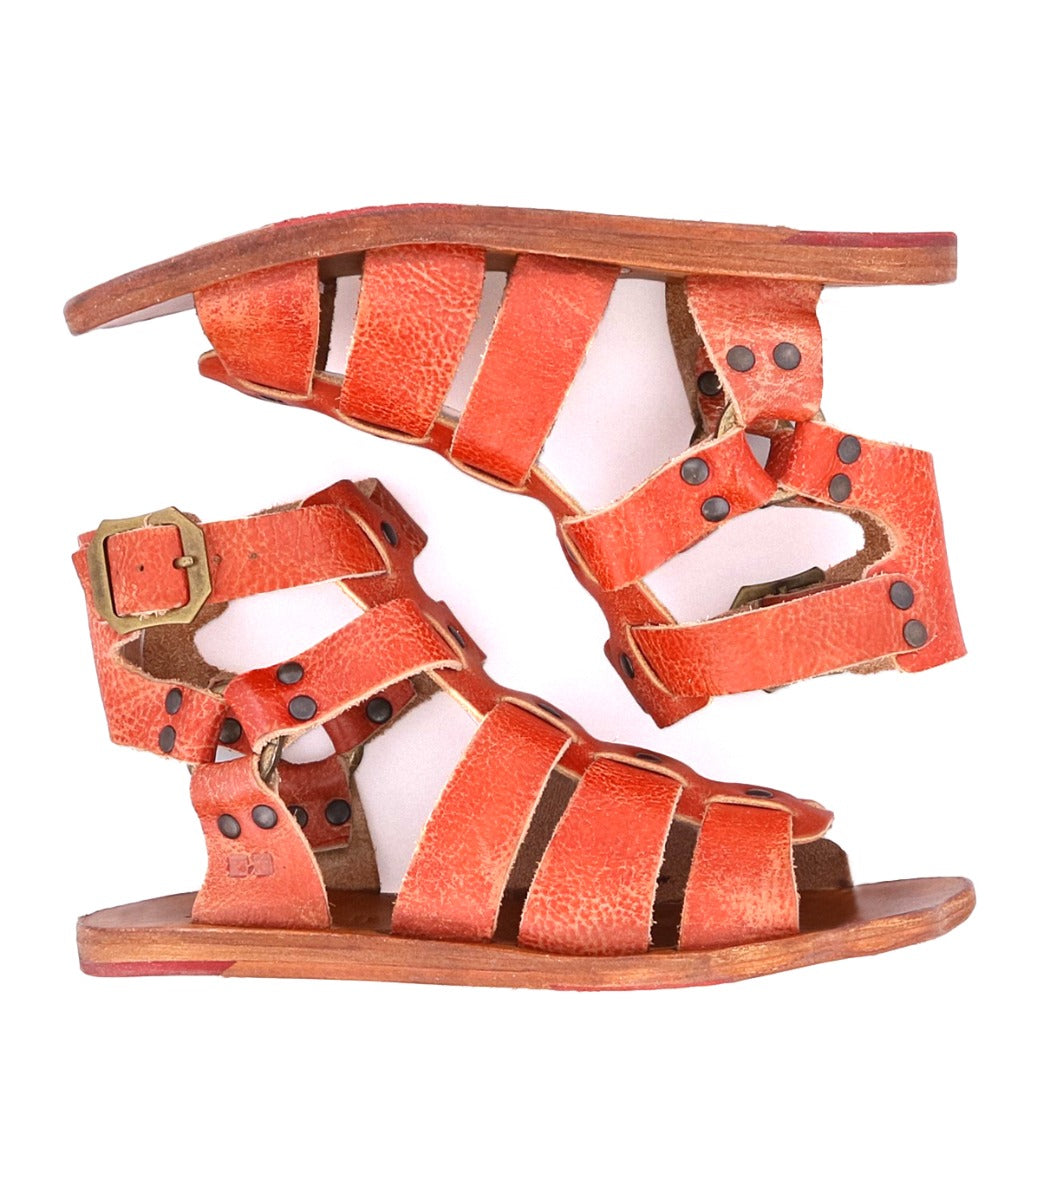 A pair of Bed Stu Hera orange sandals with buckles and straps.